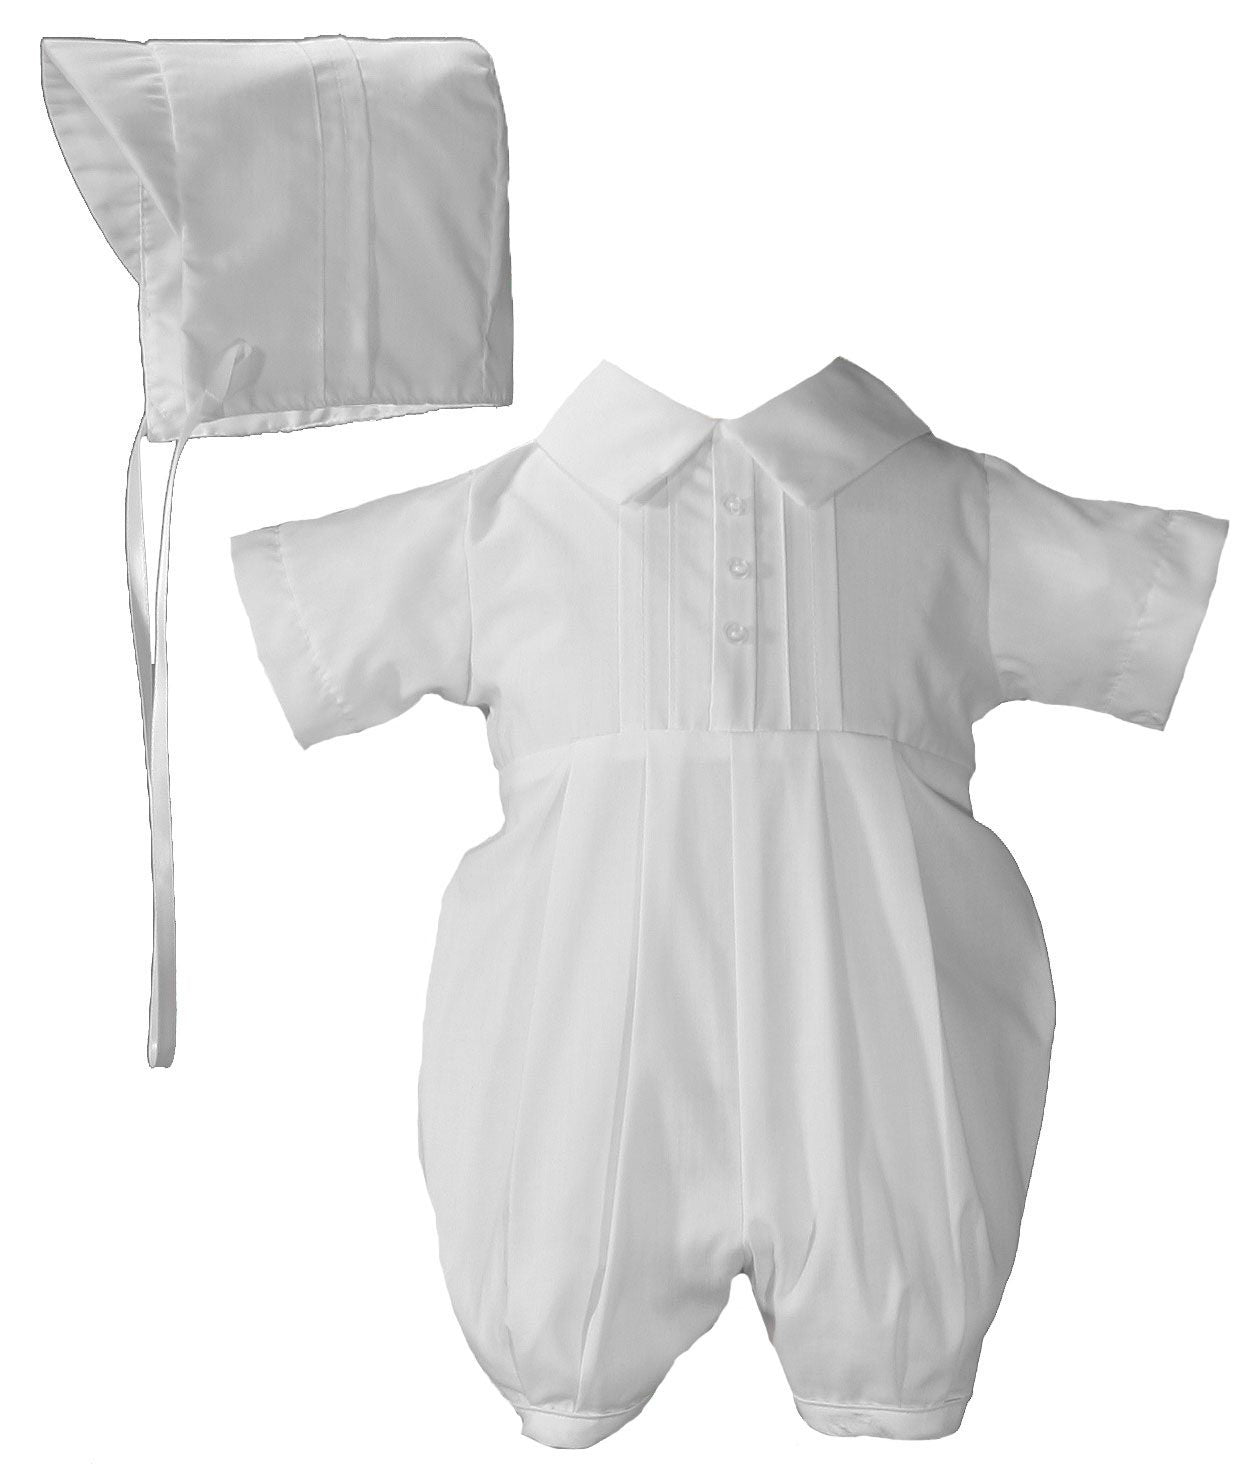 Boys One Piece Baptism Gown #BJ05RS